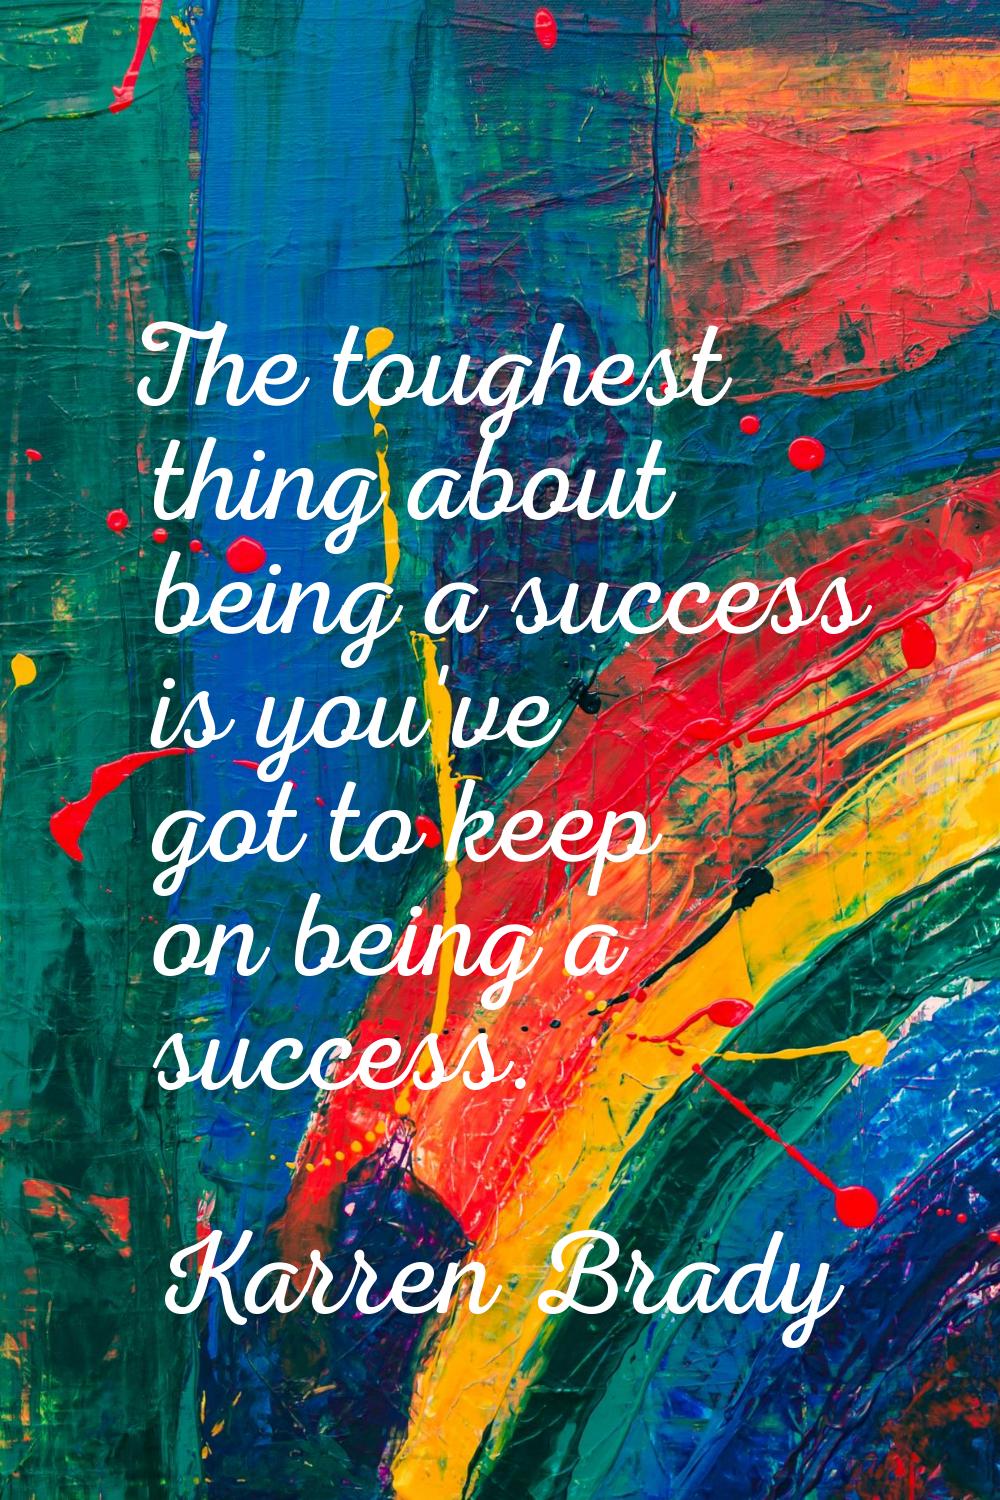 The toughest thing about being a success is you've got to keep on being a success.